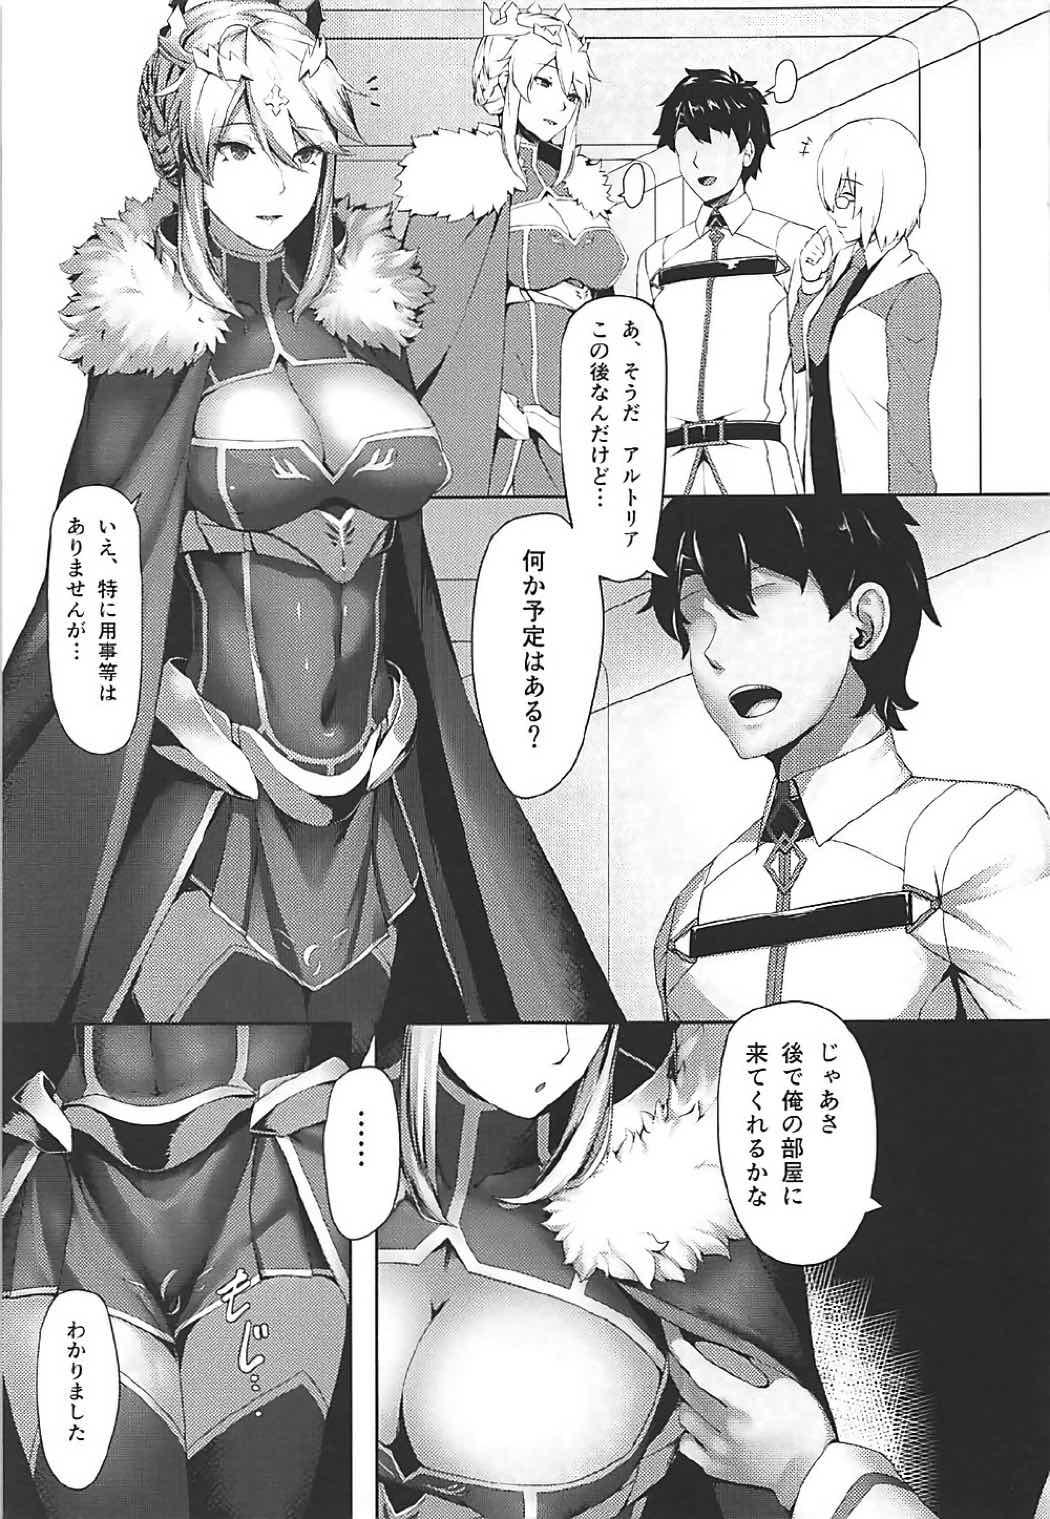 Bribe What do you like? - Fate grand order Ex Girlfriend - Page 2